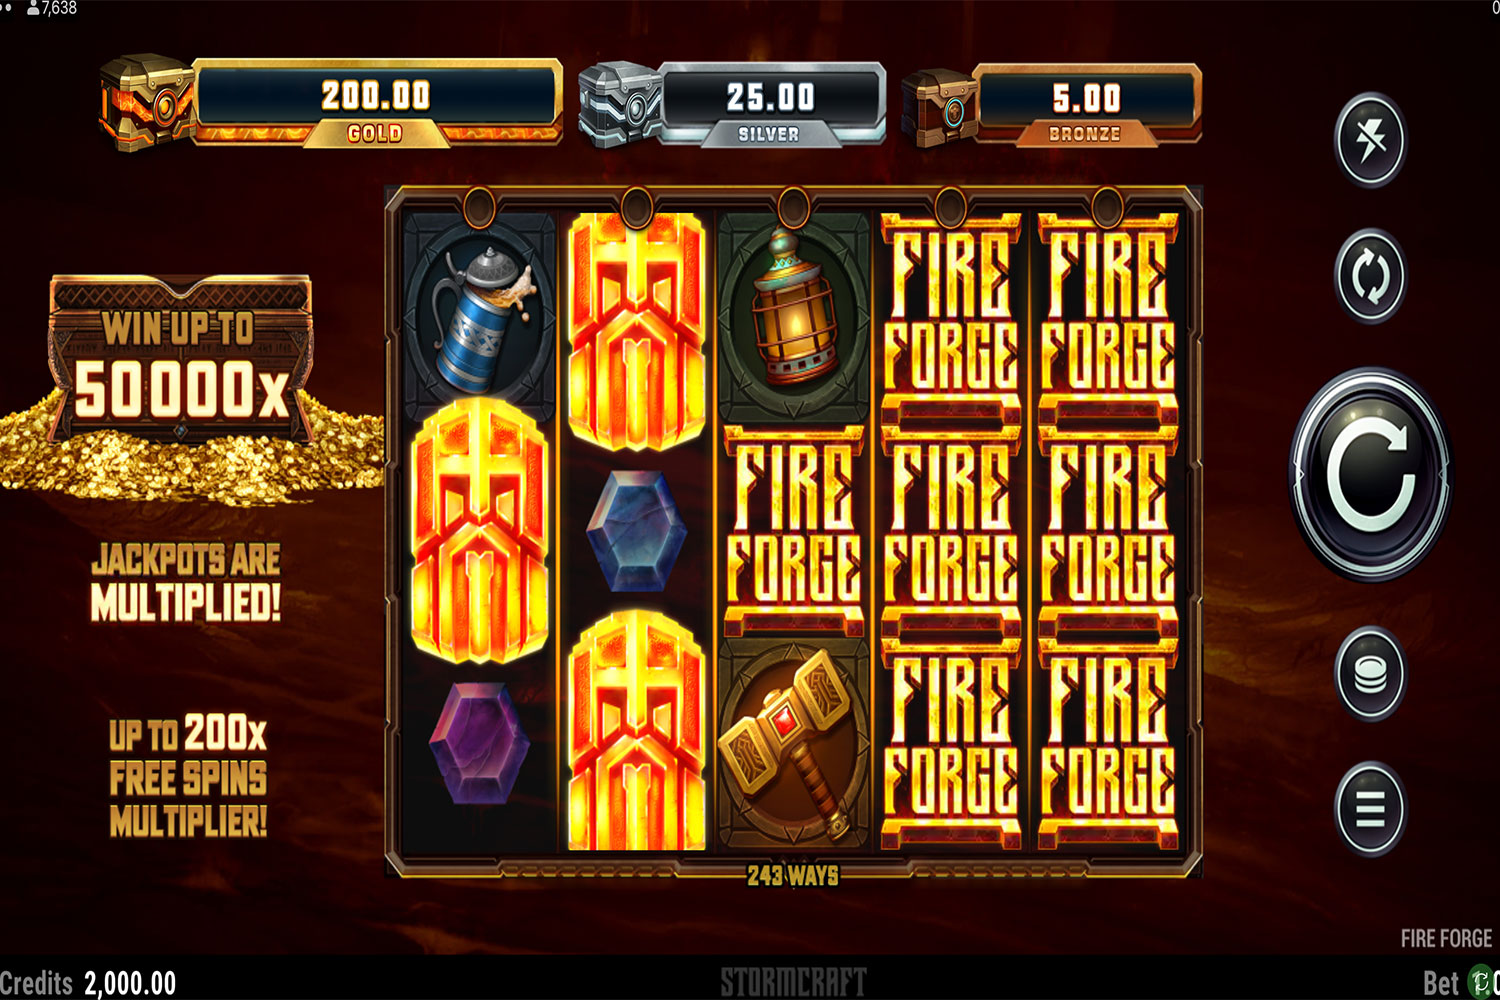 Fire Forge slot